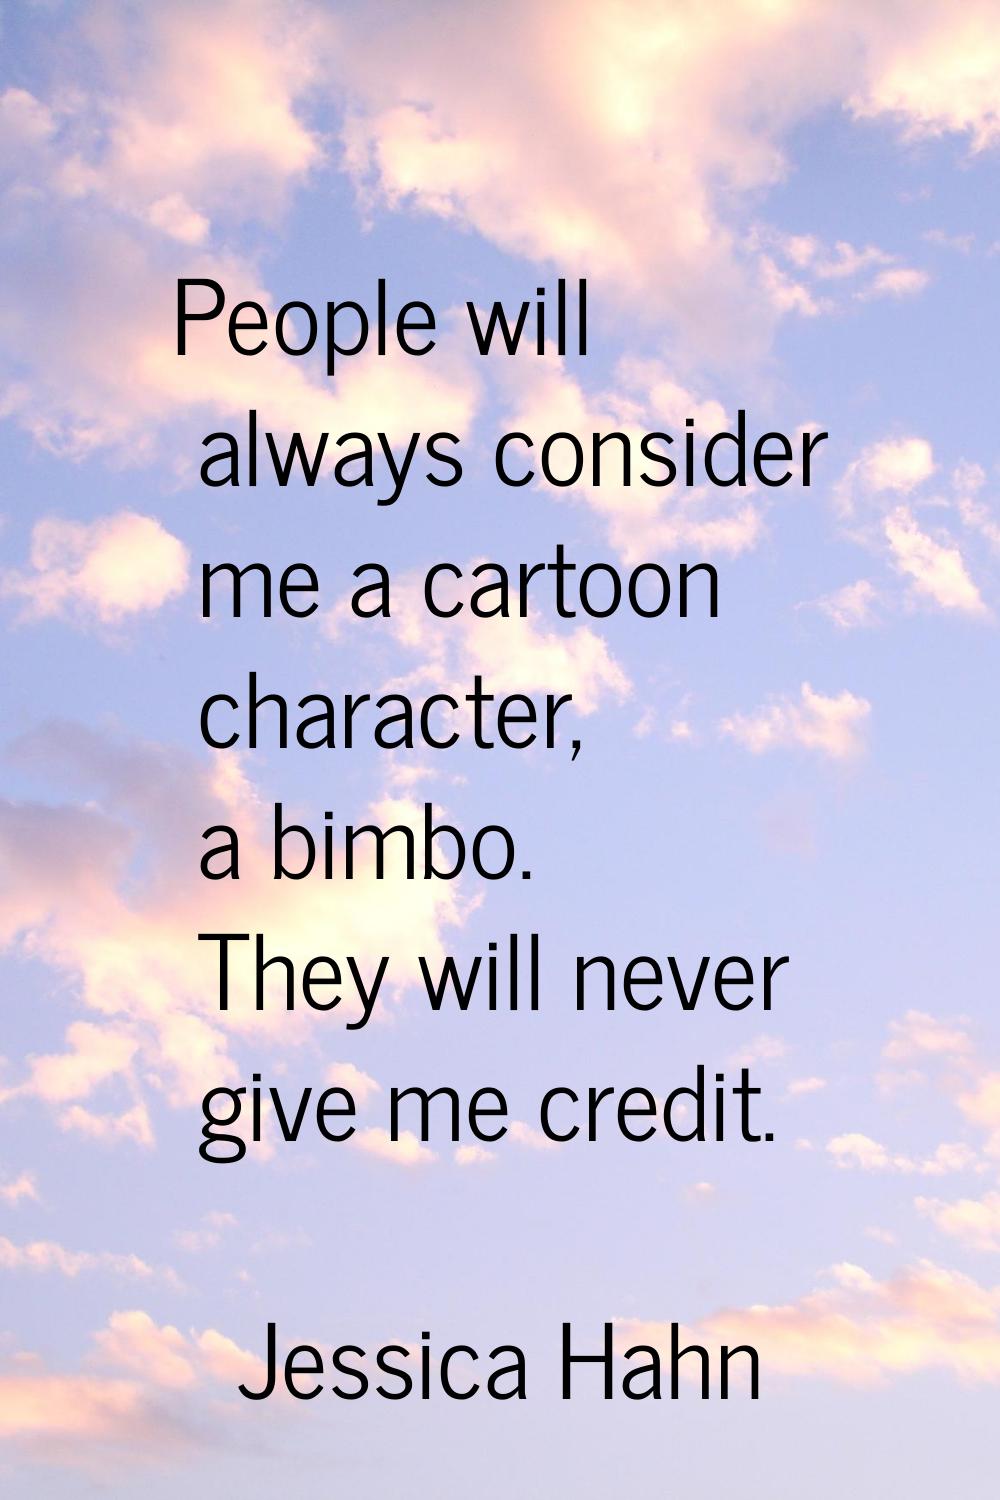 People will always consider me a cartoon character, a bimbo. They will never give me credit.